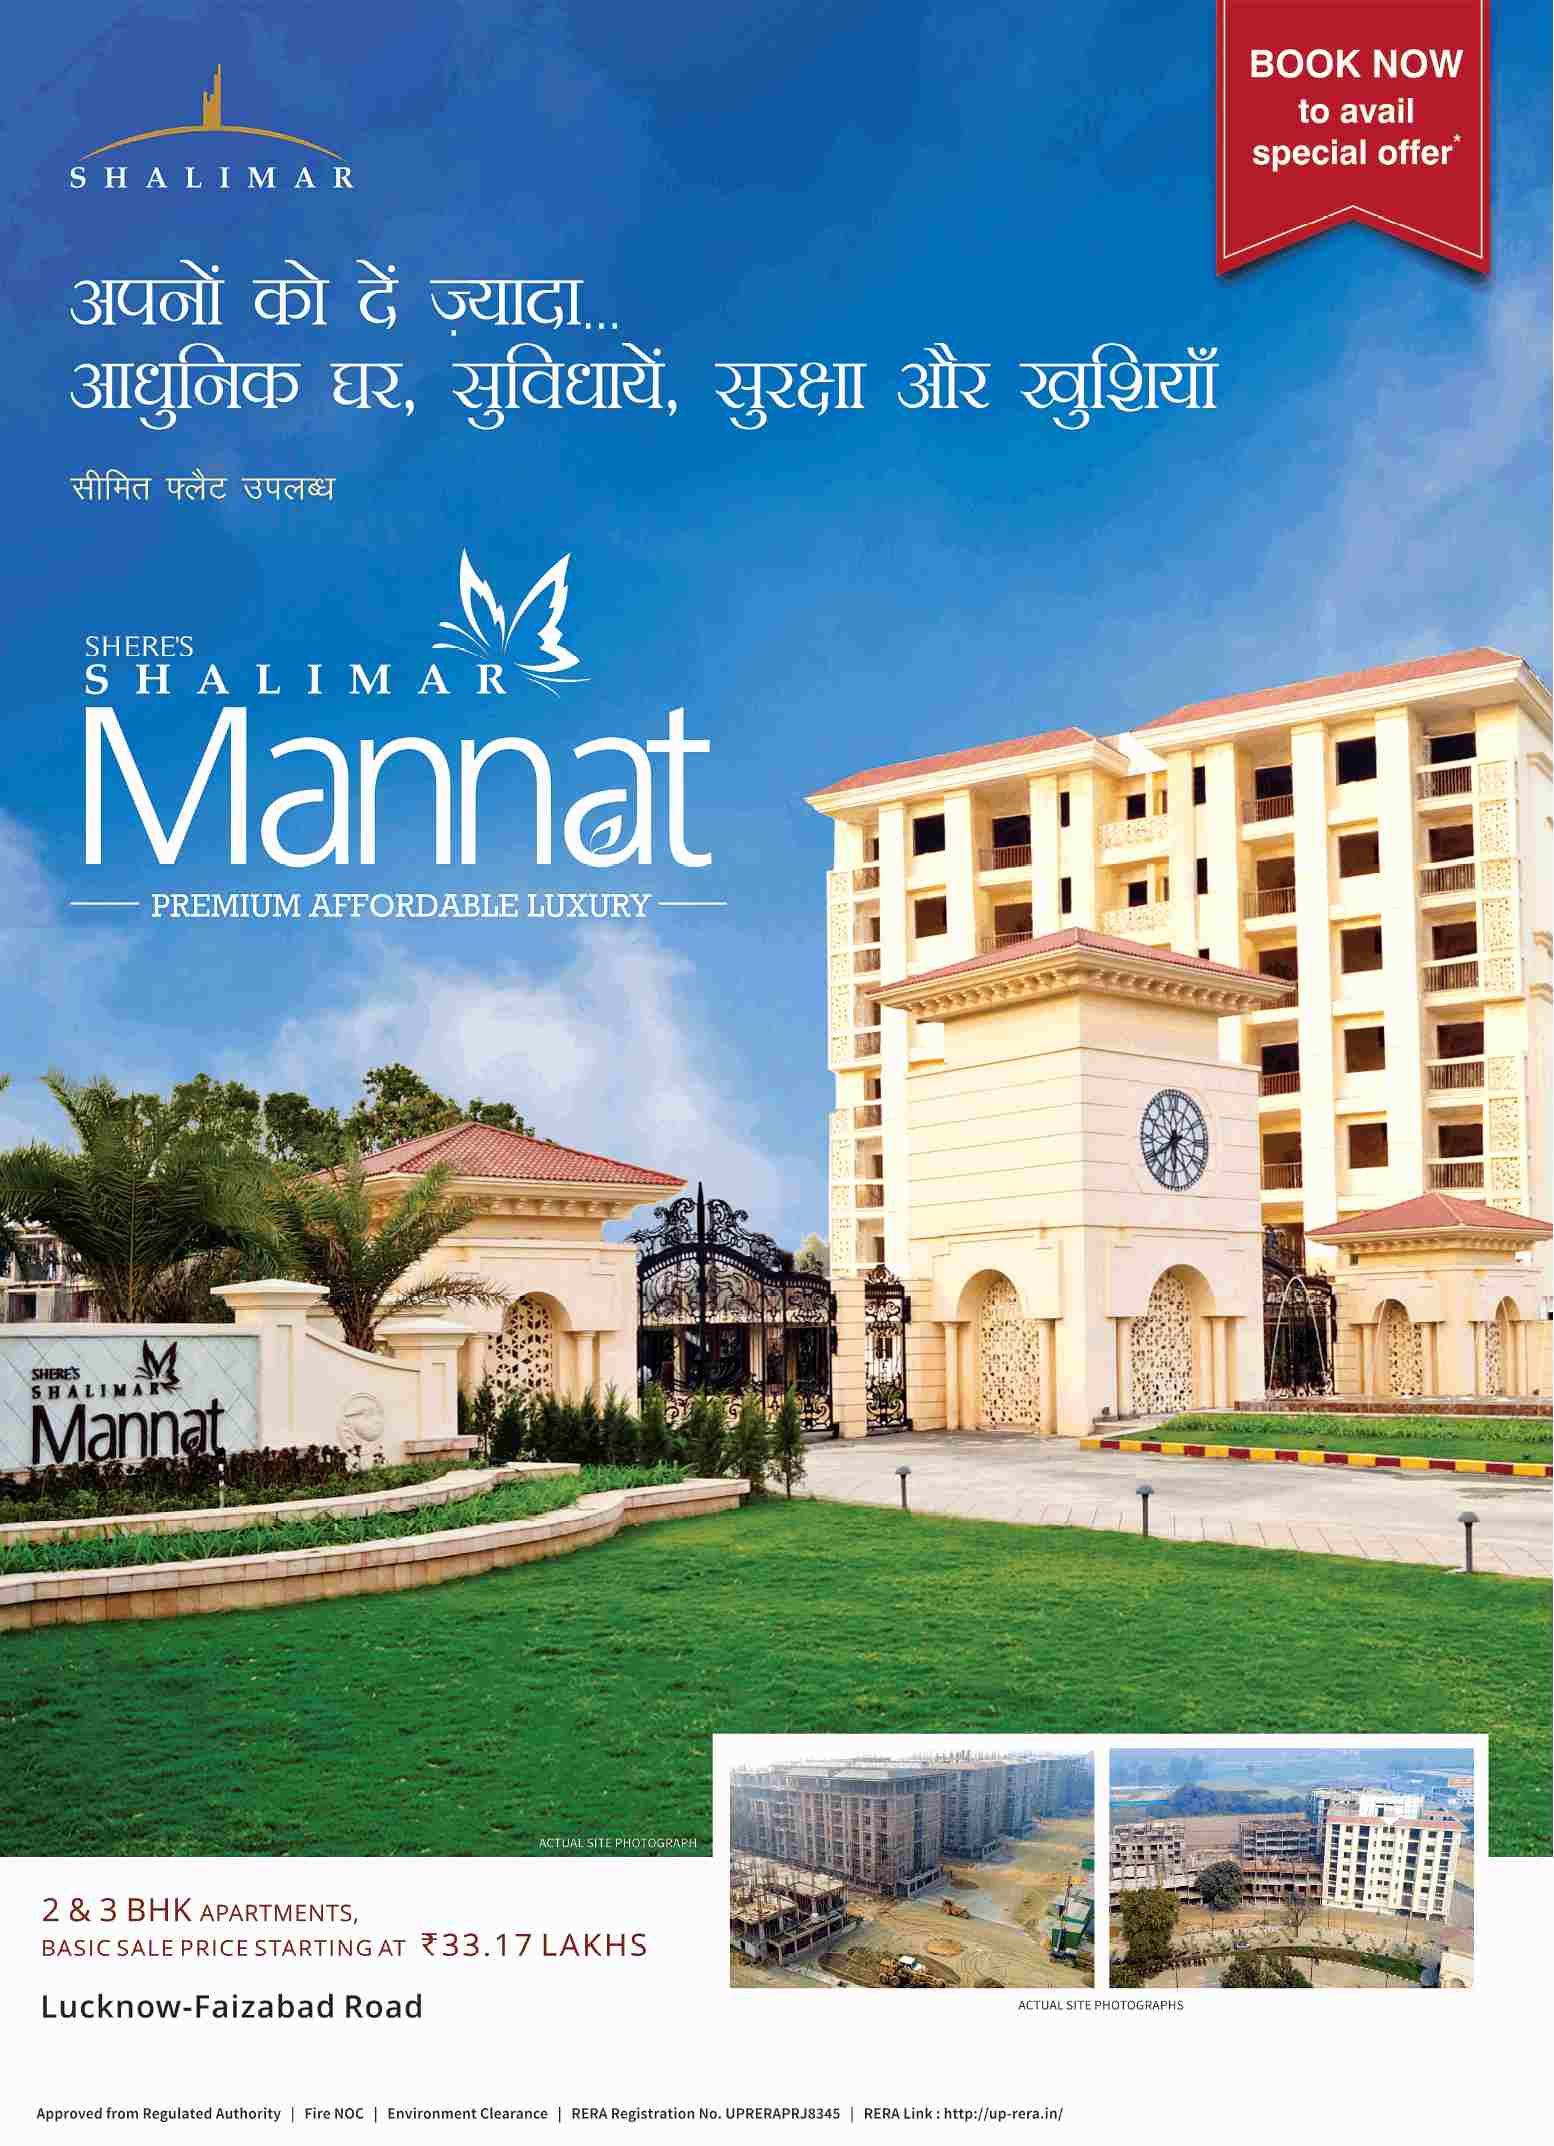 Reside in the pure amalgam of comfort and style at Shalimar Mannat in Lucknow Update